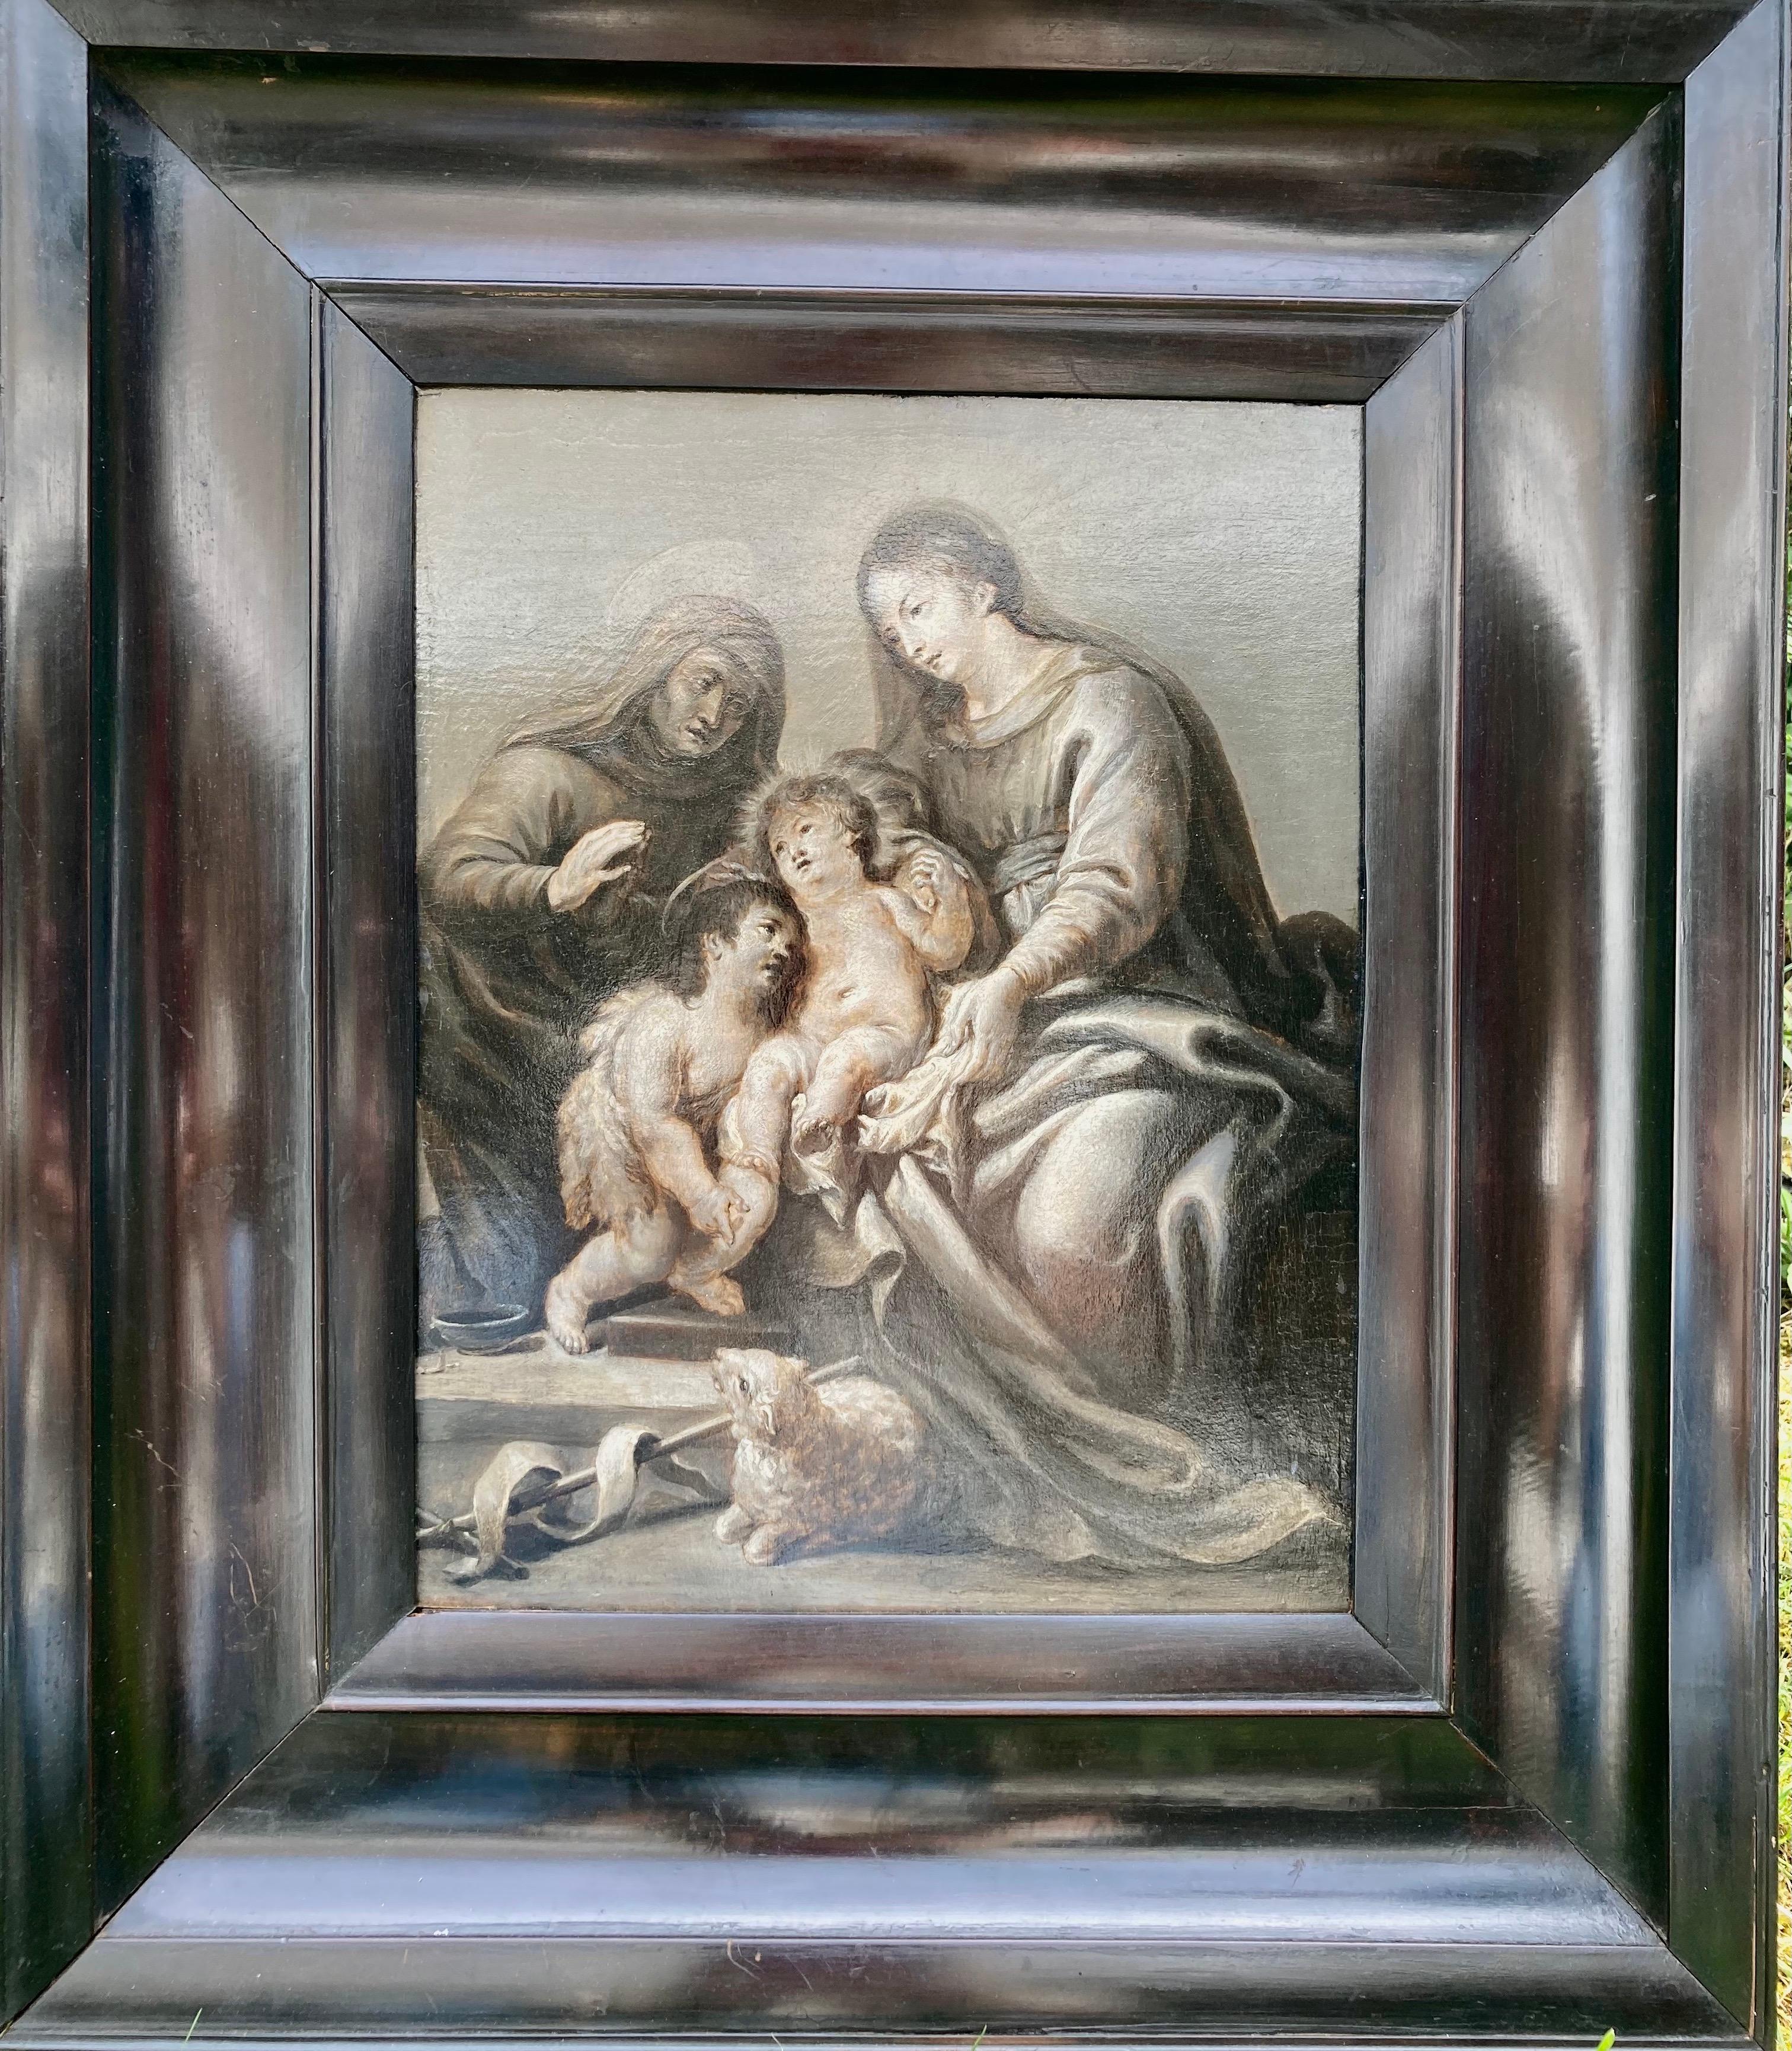 Cornelis Schut, atrributed to
(1597 - Antwerp - 1655)

Mary with Child, St. Elisabeth and John the Baptist en grisaille
Oil on wood, 33,5 x 26,5 cm 

Cornelis Schut was born in Antwerp and became - after his apprenticeship with an unknown master -